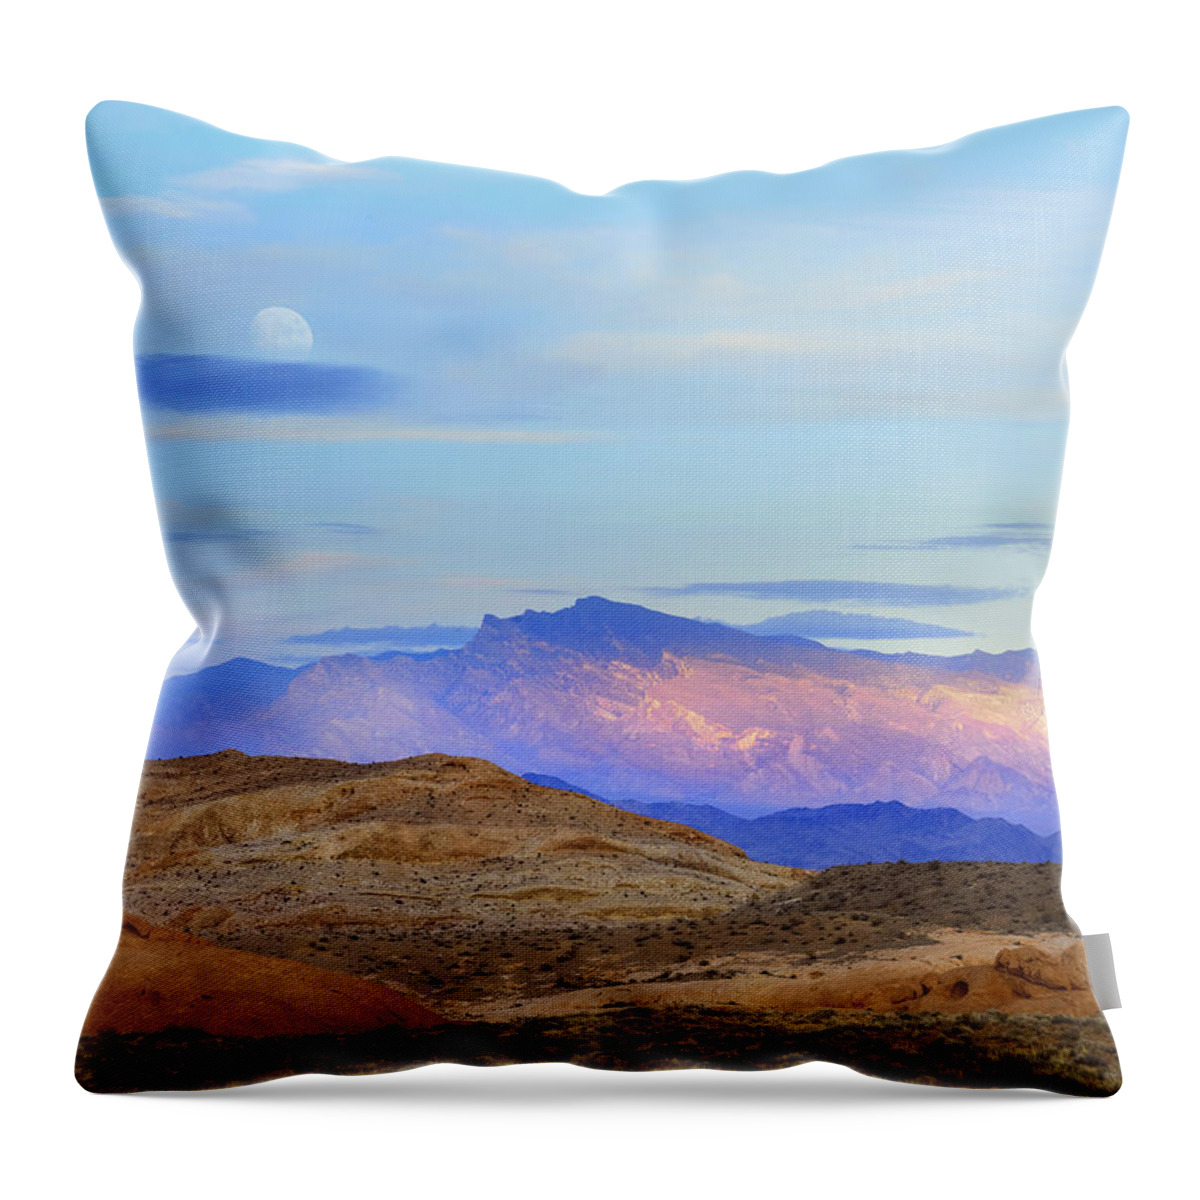 00175185 Throw Pillow featuring the photograph Sunset Lighting Up Mountains by Tim Fitzharris